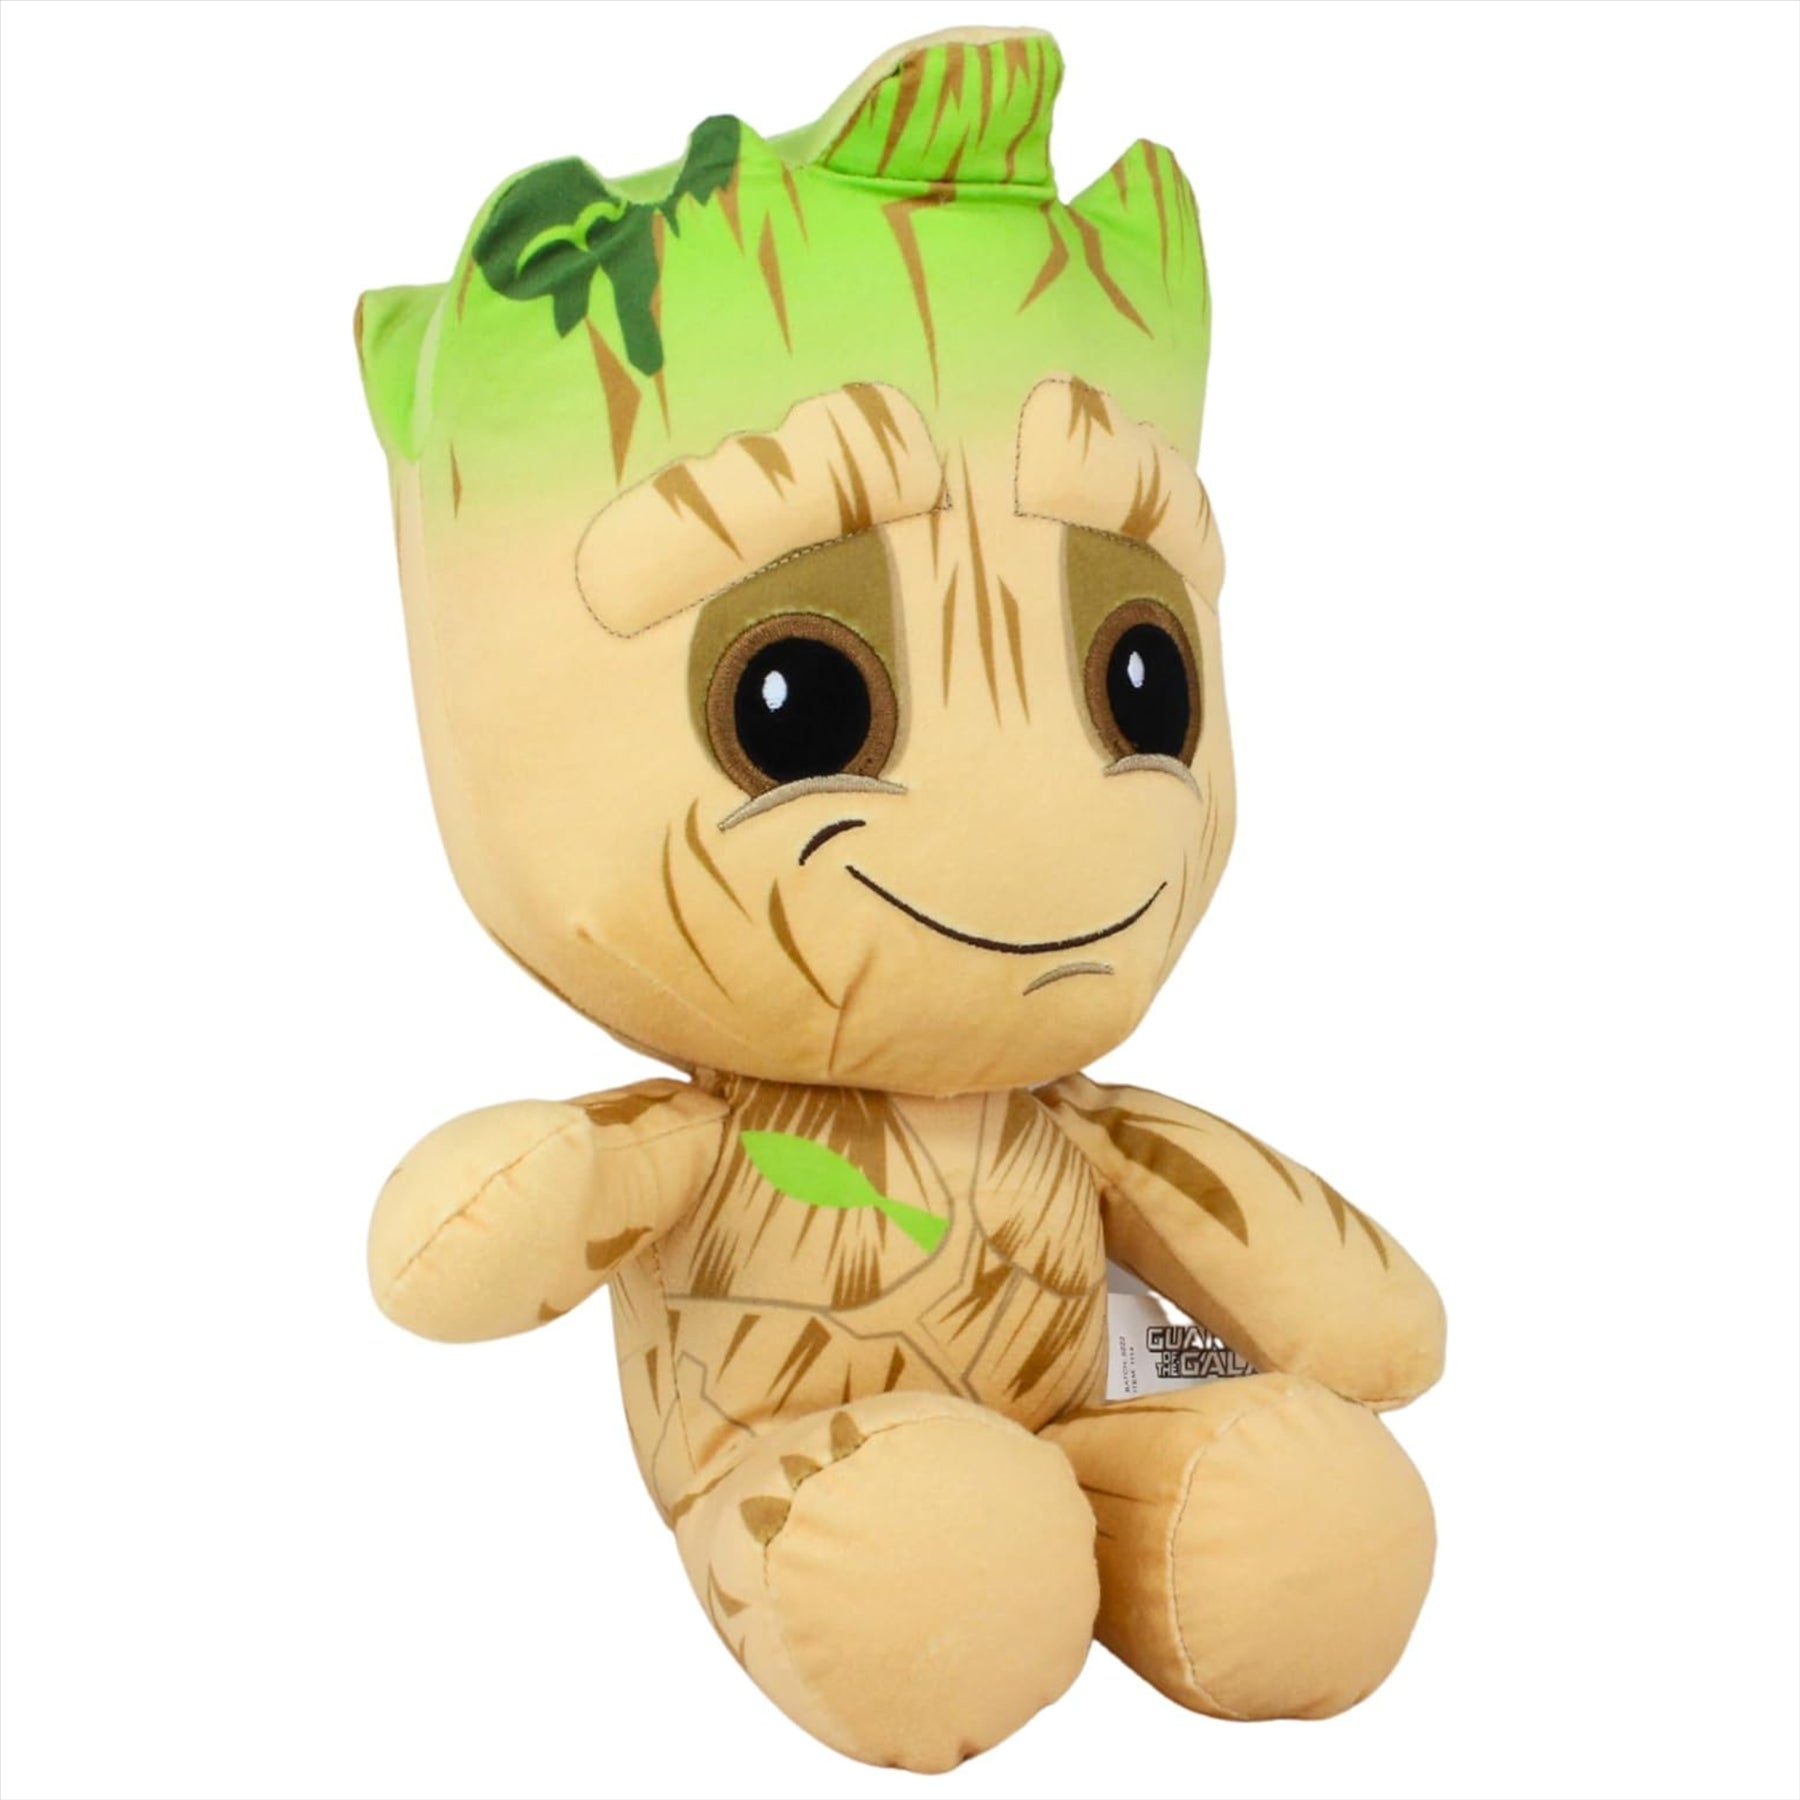 Guardians of the Galaxy Avengers Groot Super Soft Embroidered 36cm Plush Toy - Toptoys2u